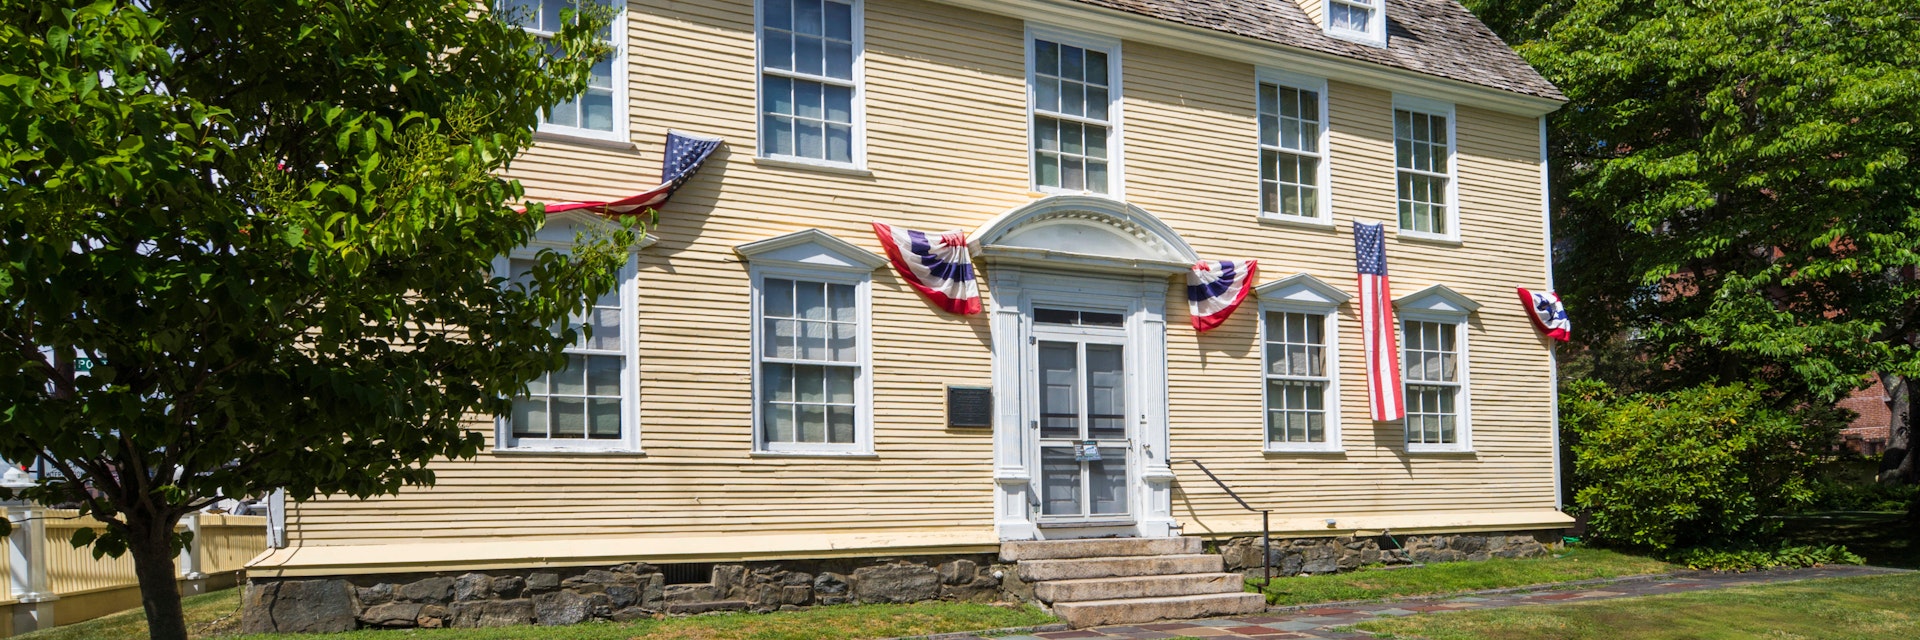 W2CGF9 USA, New Hampshire, Portsmouth, John Paul Jones House, one time home of naval hero of the American Revolution